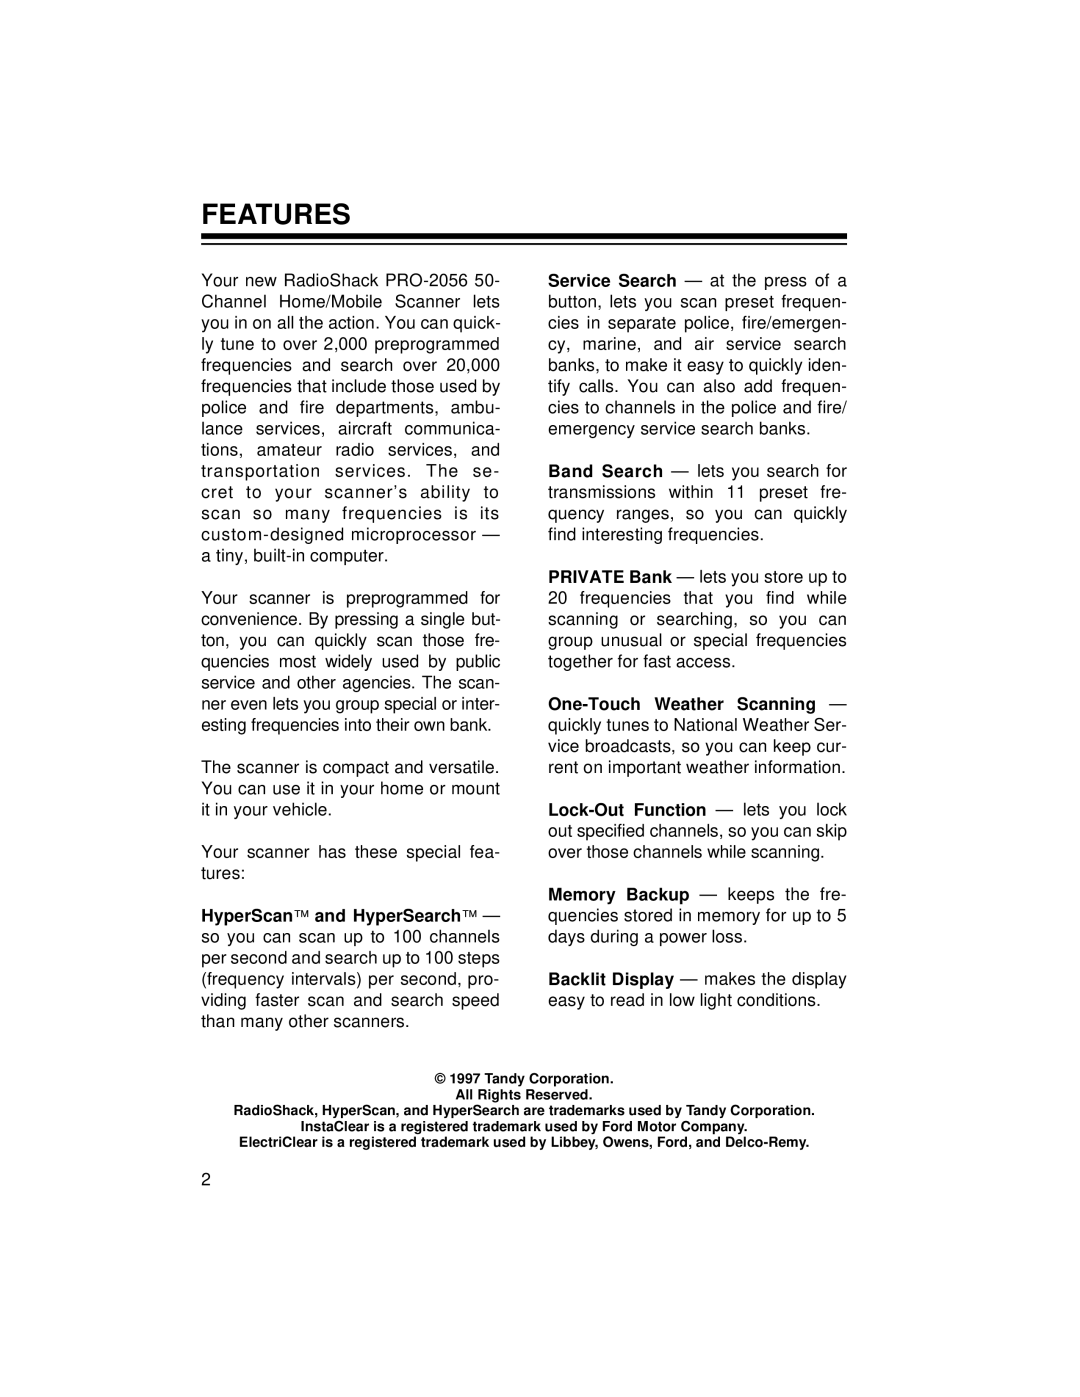 Radio Shack PRO-2056 owner manual Features 